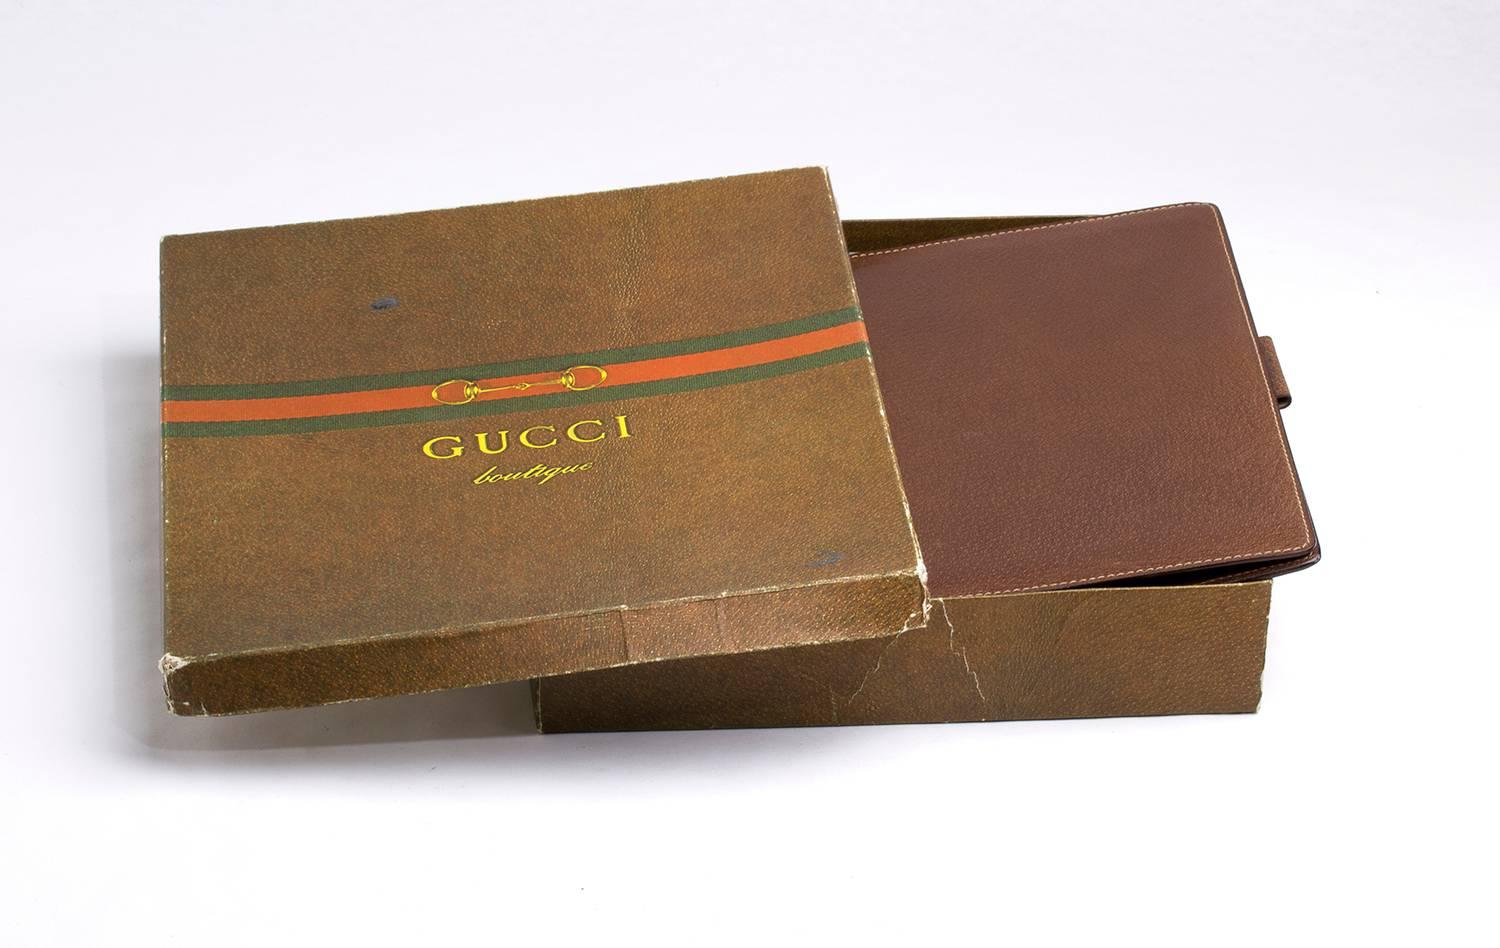 Beautiful Gucci brown leather organizer holder
The exterior is crafted in brown leather
It comes with its box 

Material: Light Brown Leather

Approx. Measurements (height x lenght ): 26x22 cm

Condition  :GOOD CONDITION - Some light wear of use
cod